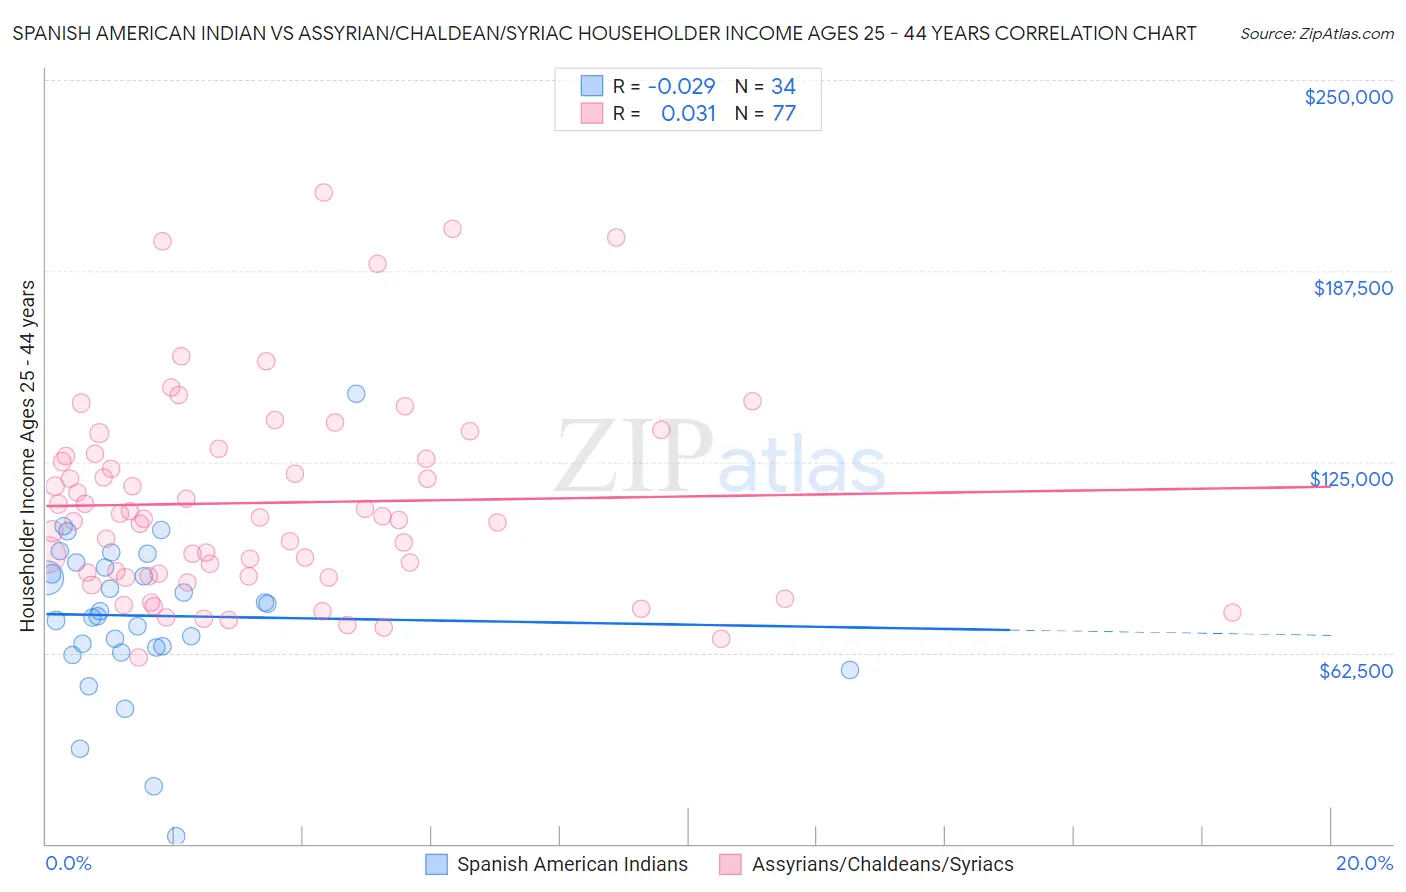 Spanish American Indian vs Assyrian/Chaldean/Syriac Householder Income Ages 25 - 44 years